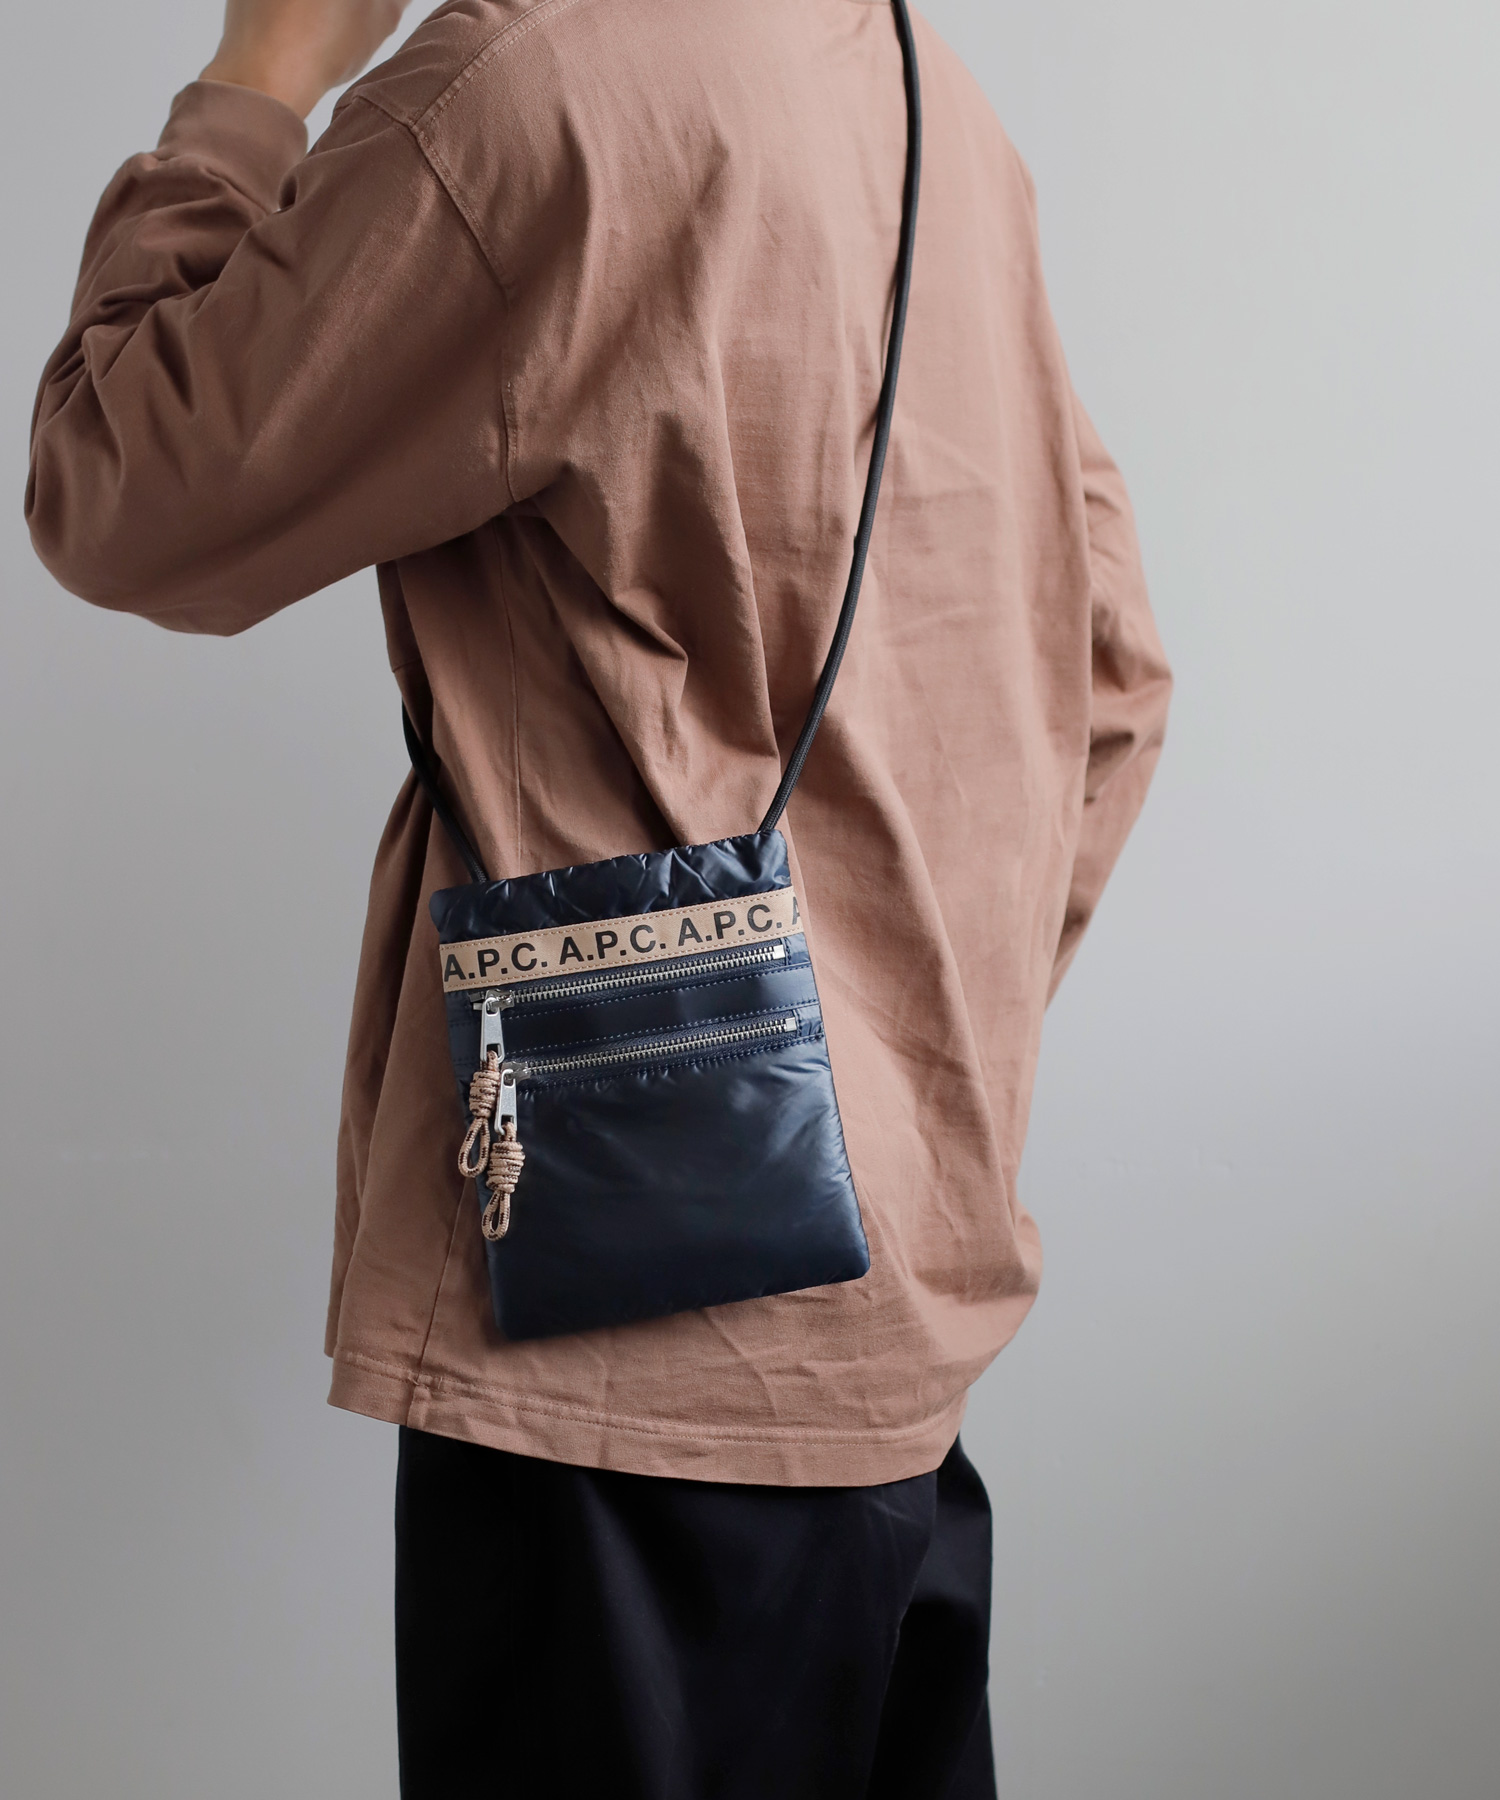 【A.P.C.】NECK POUCH REPEAT[ネックポーチ]